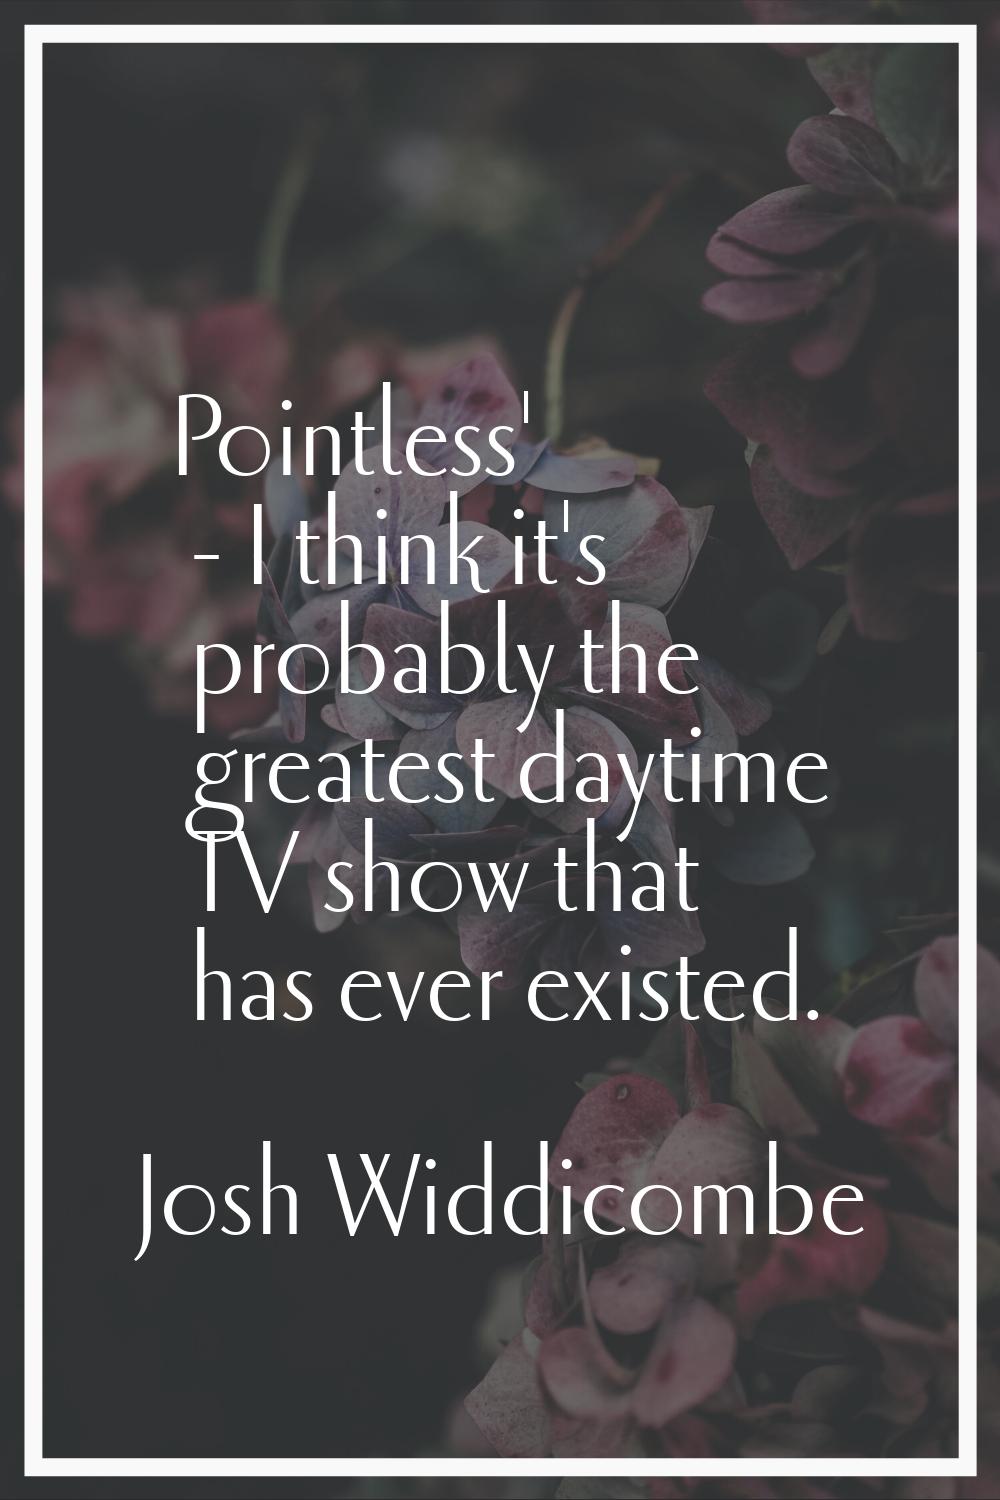 Pointless' - I think it's probably the greatest daytime TV show that has ever existed.